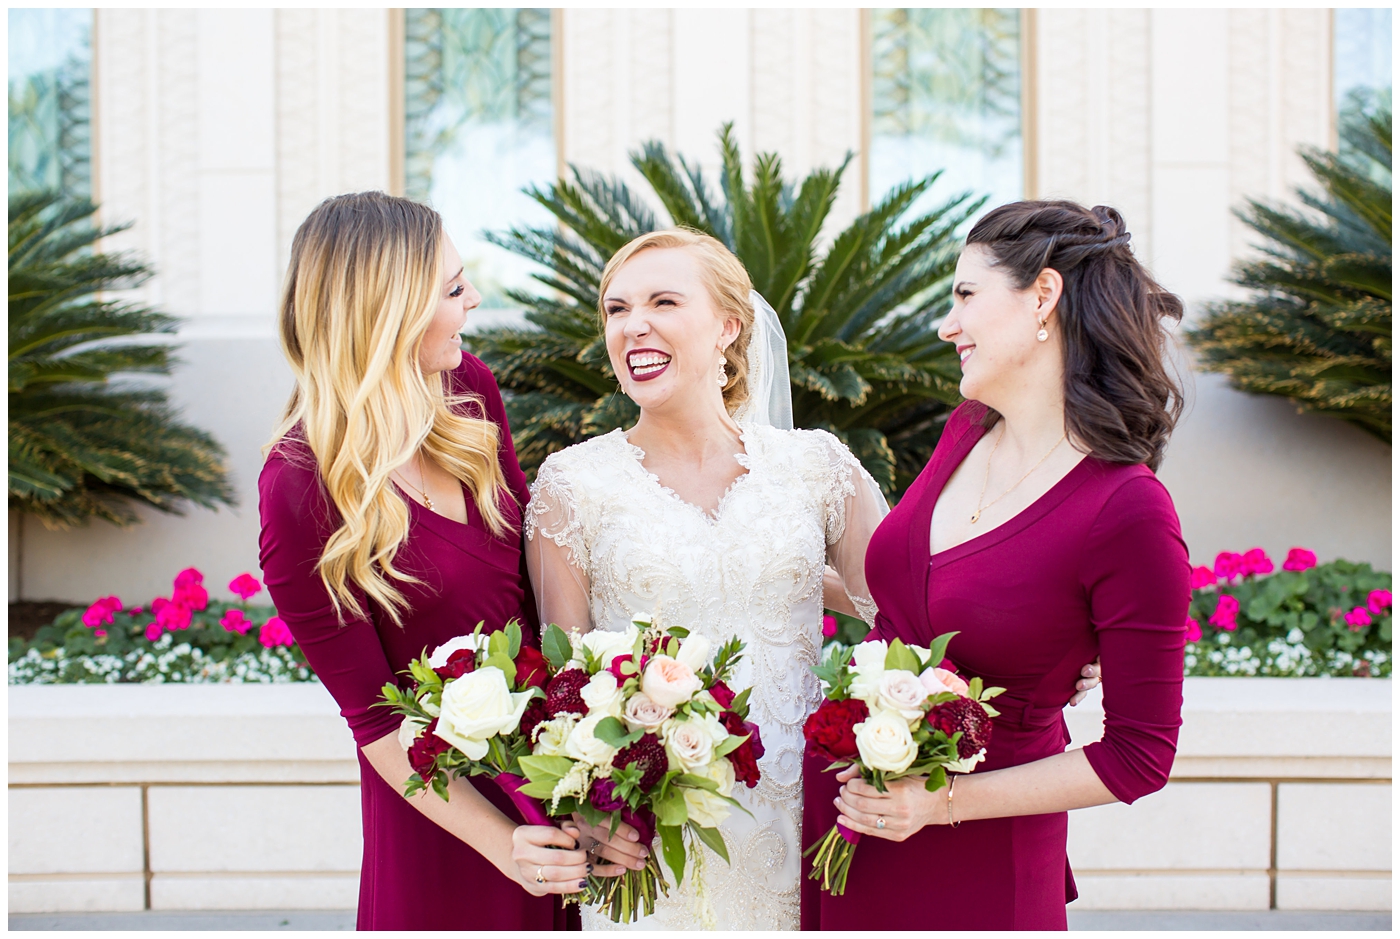 bride in sleeved lace dress with burgundy, white, and green wedding bouquet with bridesmaids in long sleeve burgundy dresses wedding day portrait at Gilbert LDS temple